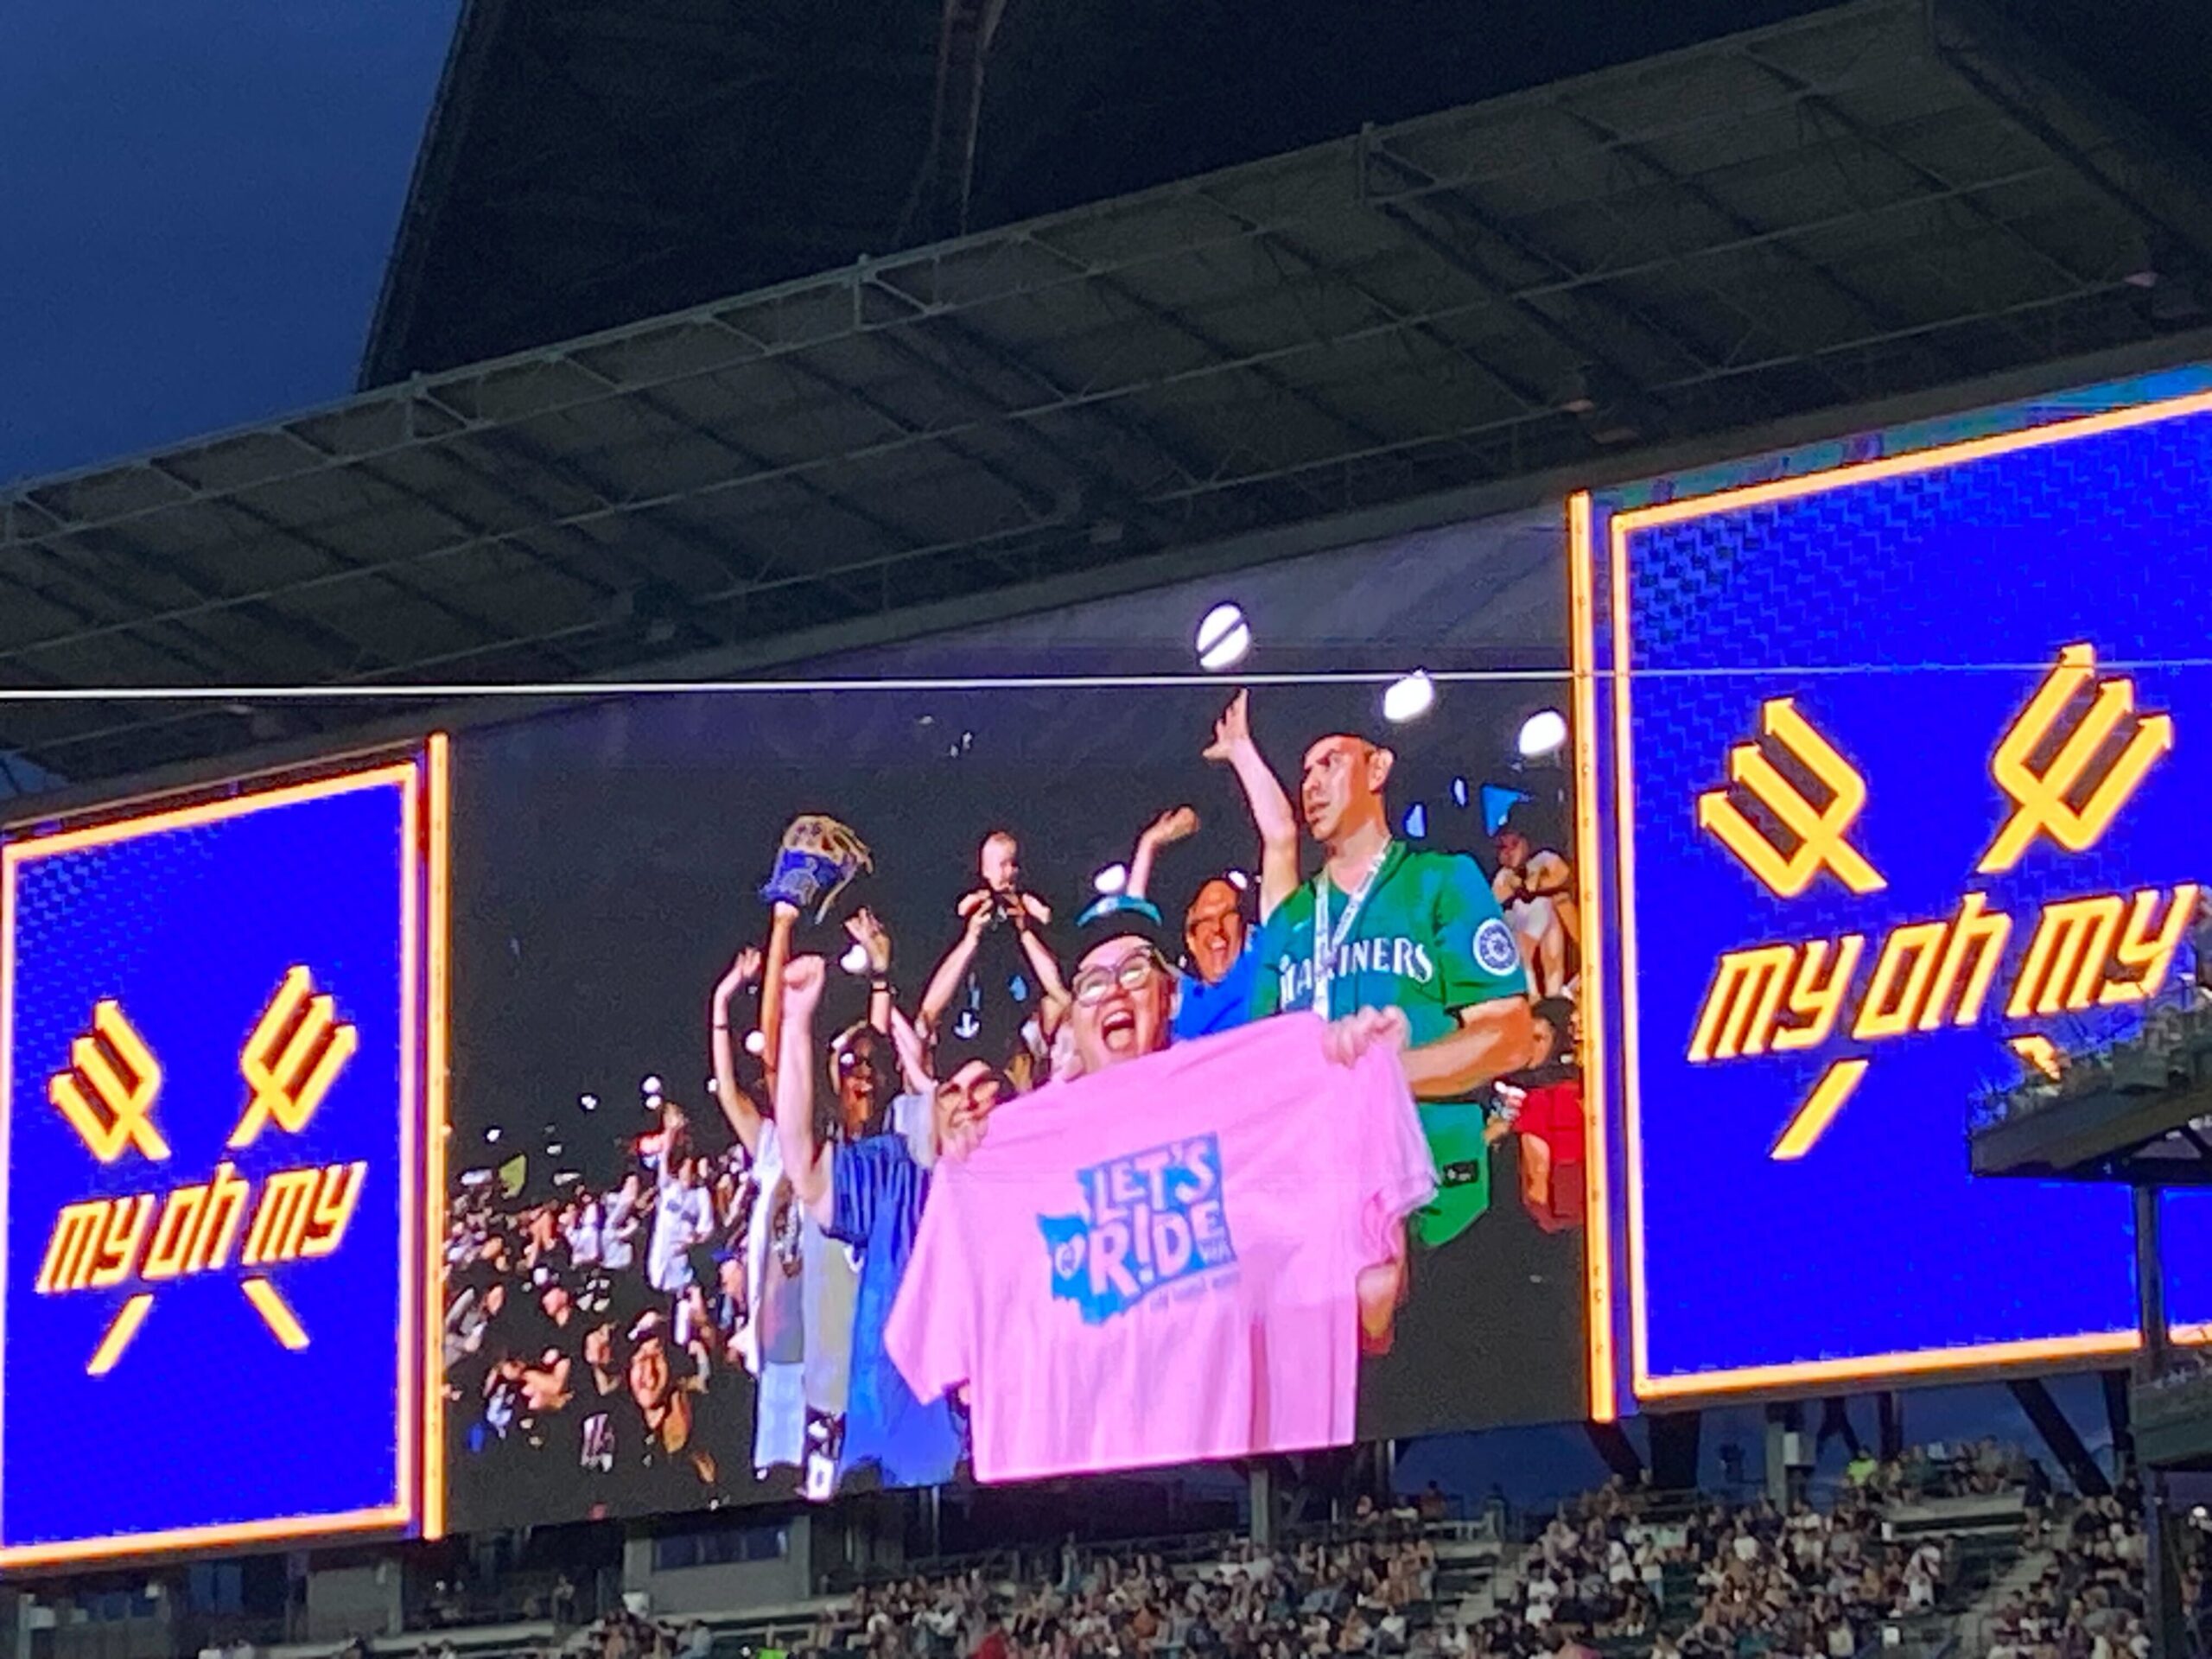 Image of the Jumbotron at a Mariners game. Screen shows a fan holding up a "Let's Ride, WA" pink t-shirt